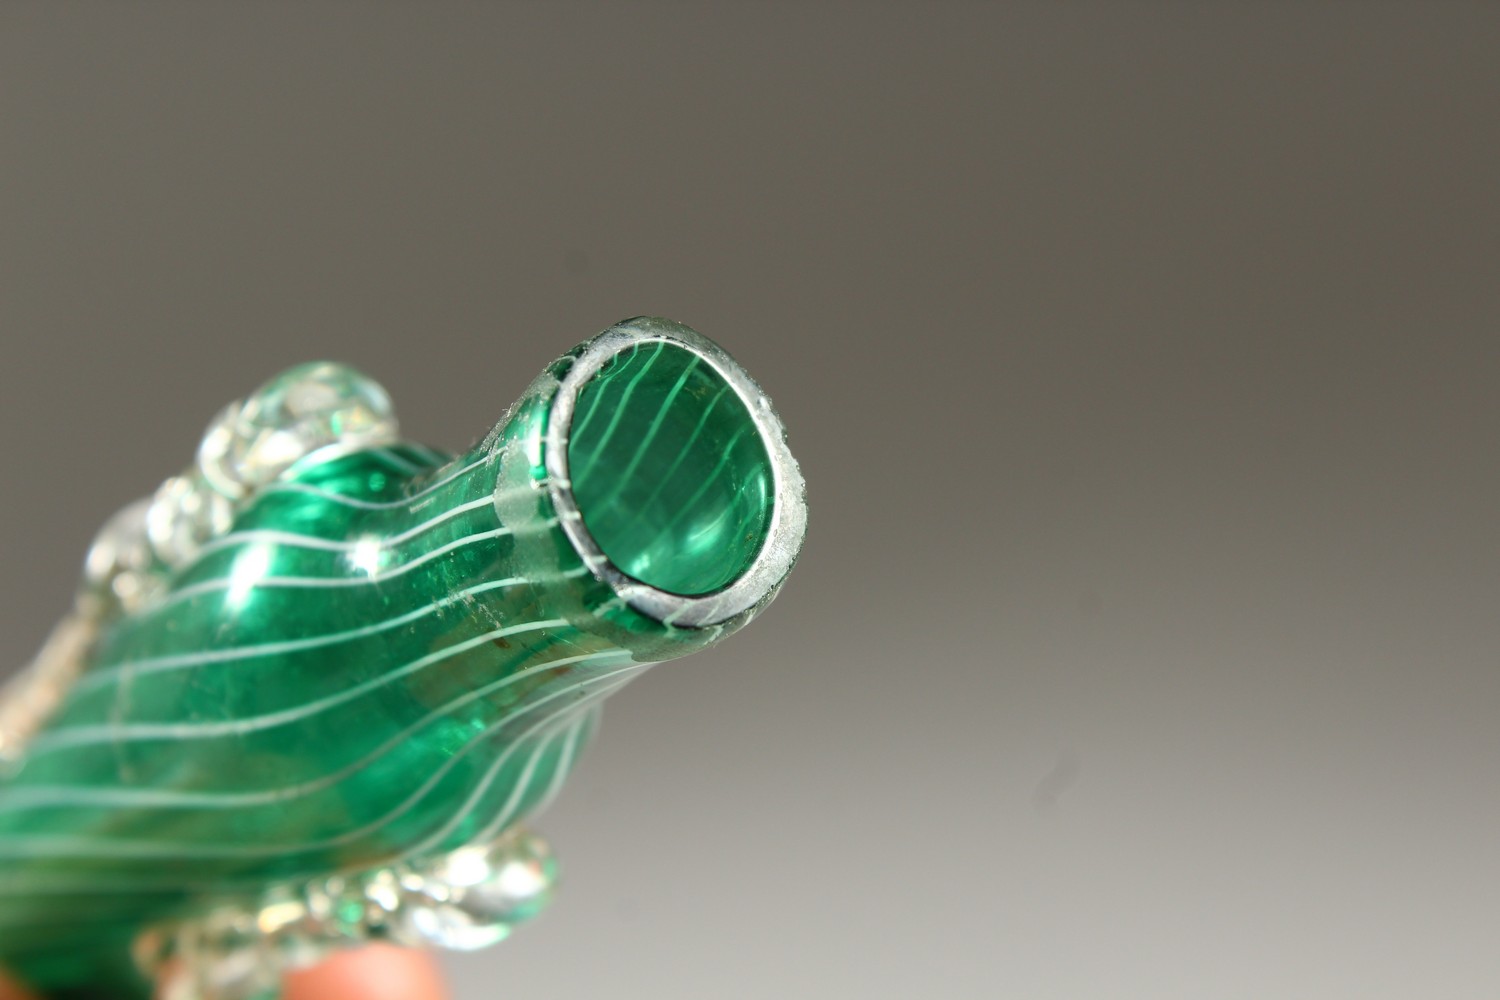 AN ITALIAN GREEN GLASS SPIRAL SHAPED SCENT BOTTLE with cork stopper. 7.5cms long. - Image 7 of 7